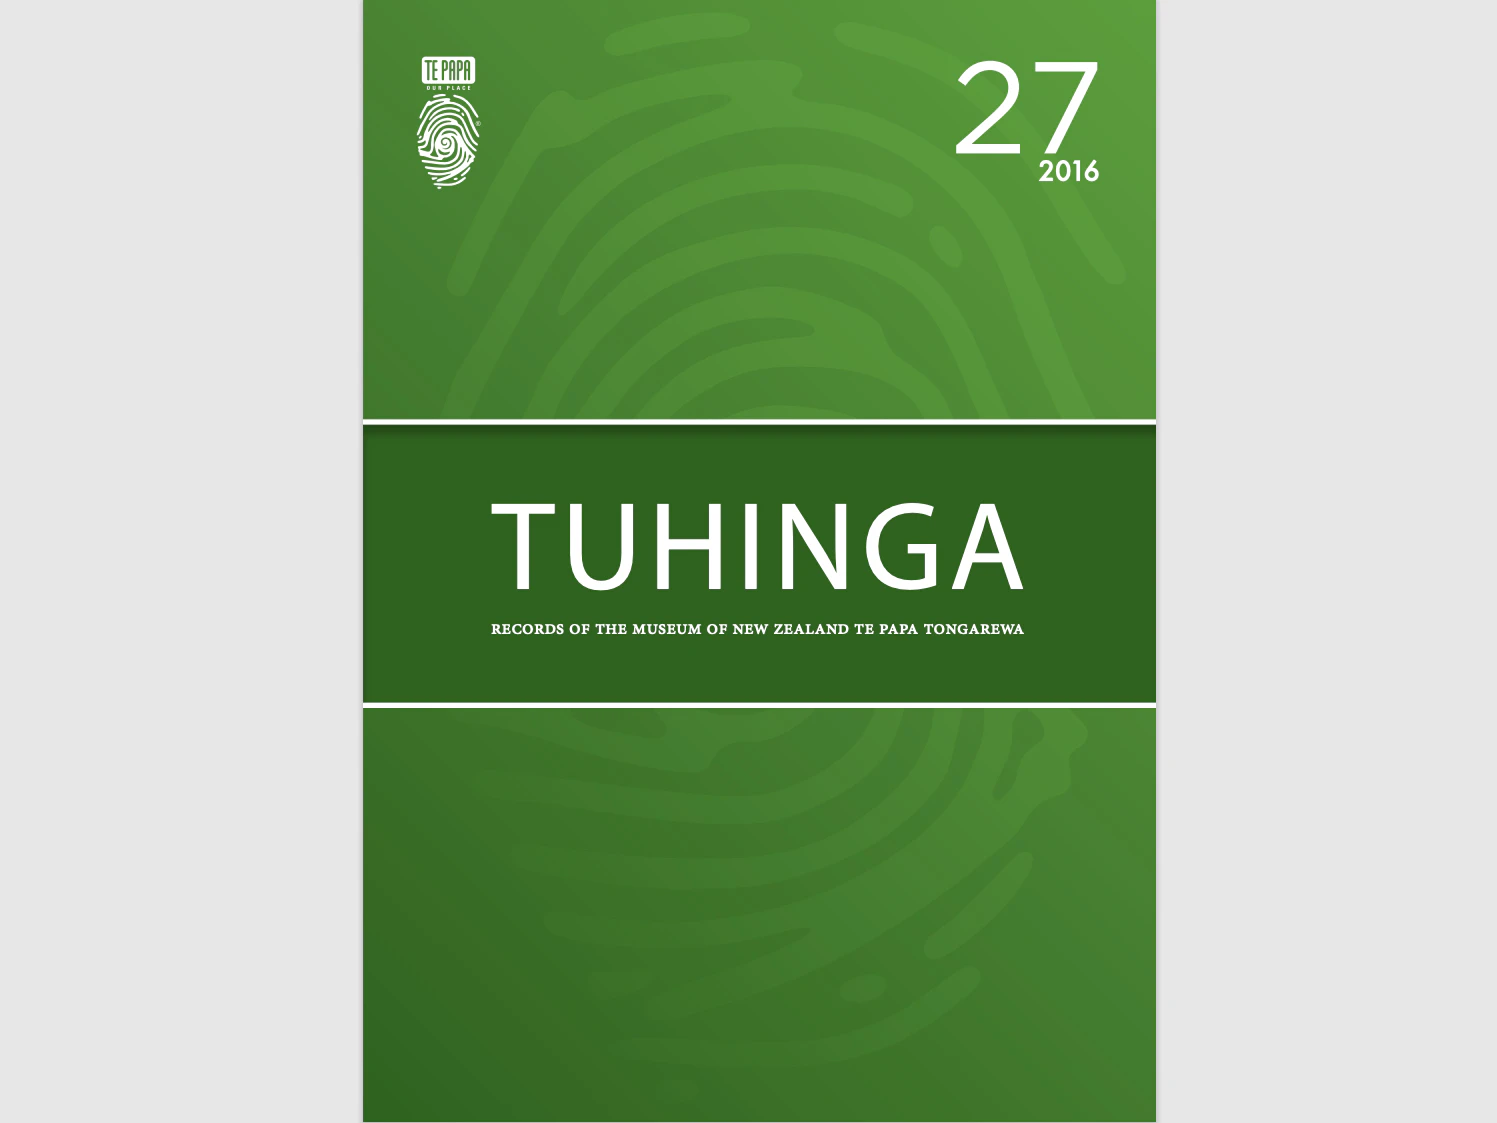 Photo of the cover of a journal with Tuhinga 27 2016 written in white on a green background